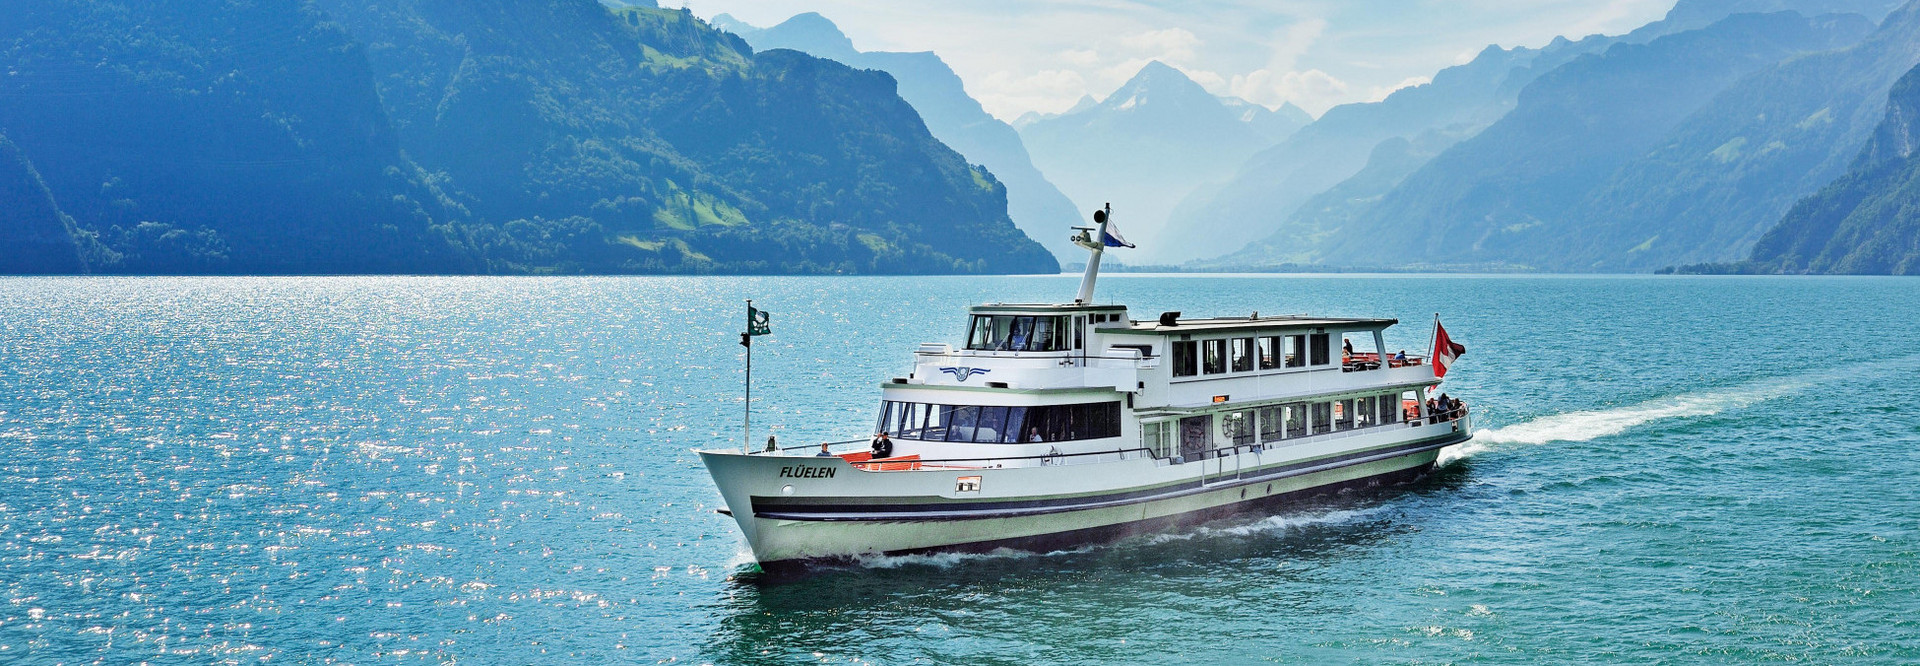 The motor vessel Flüelen sails from Uri to Lucerne on a beautiful summer day.